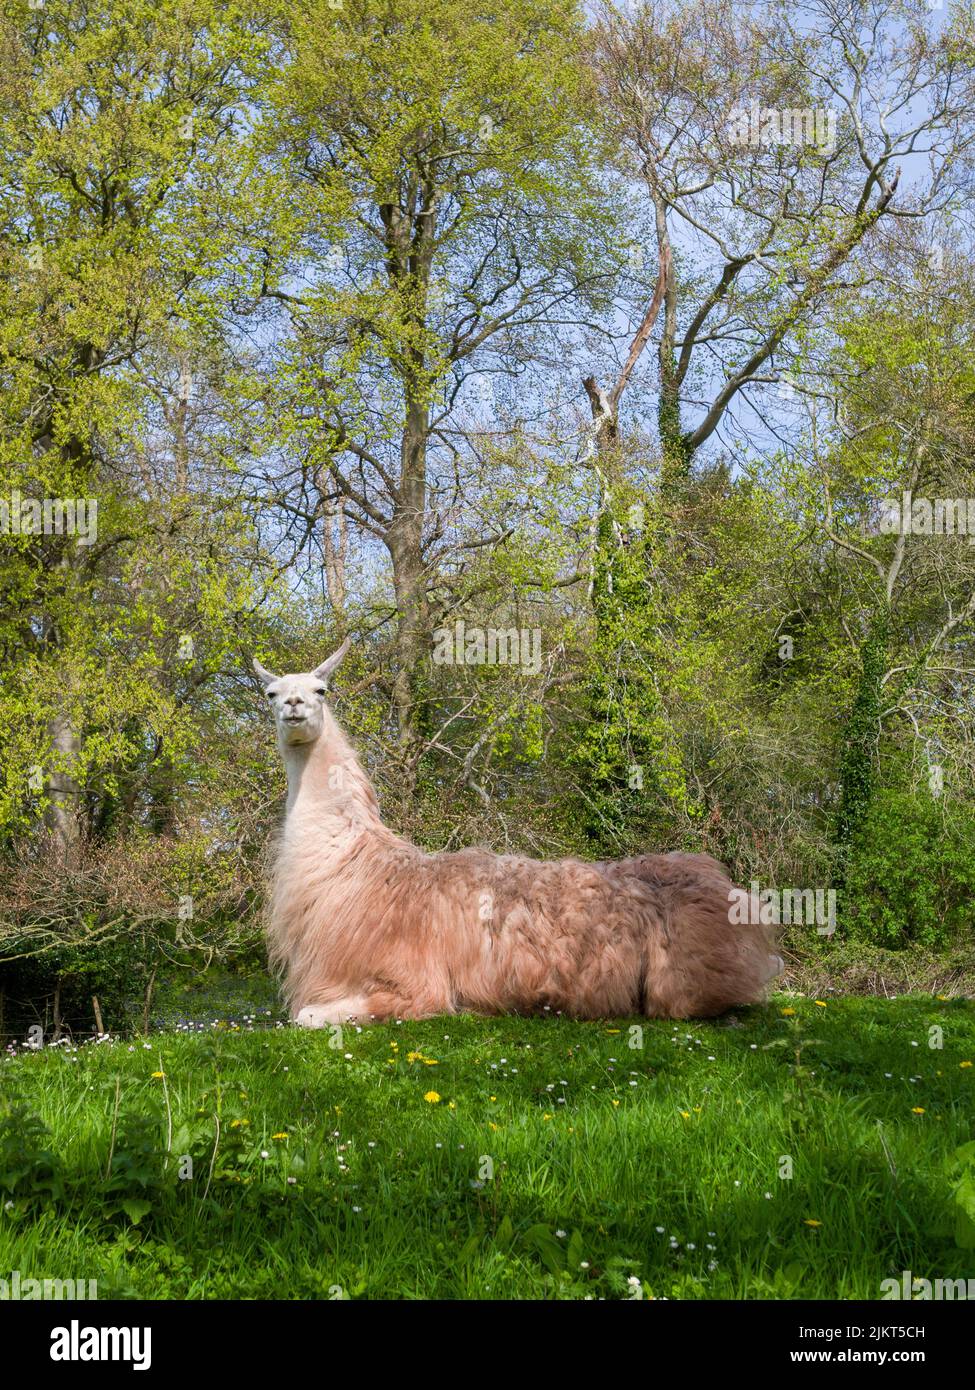 A domestic Llama (Lama glama) resting in a field in the South West of England. Stock Photo